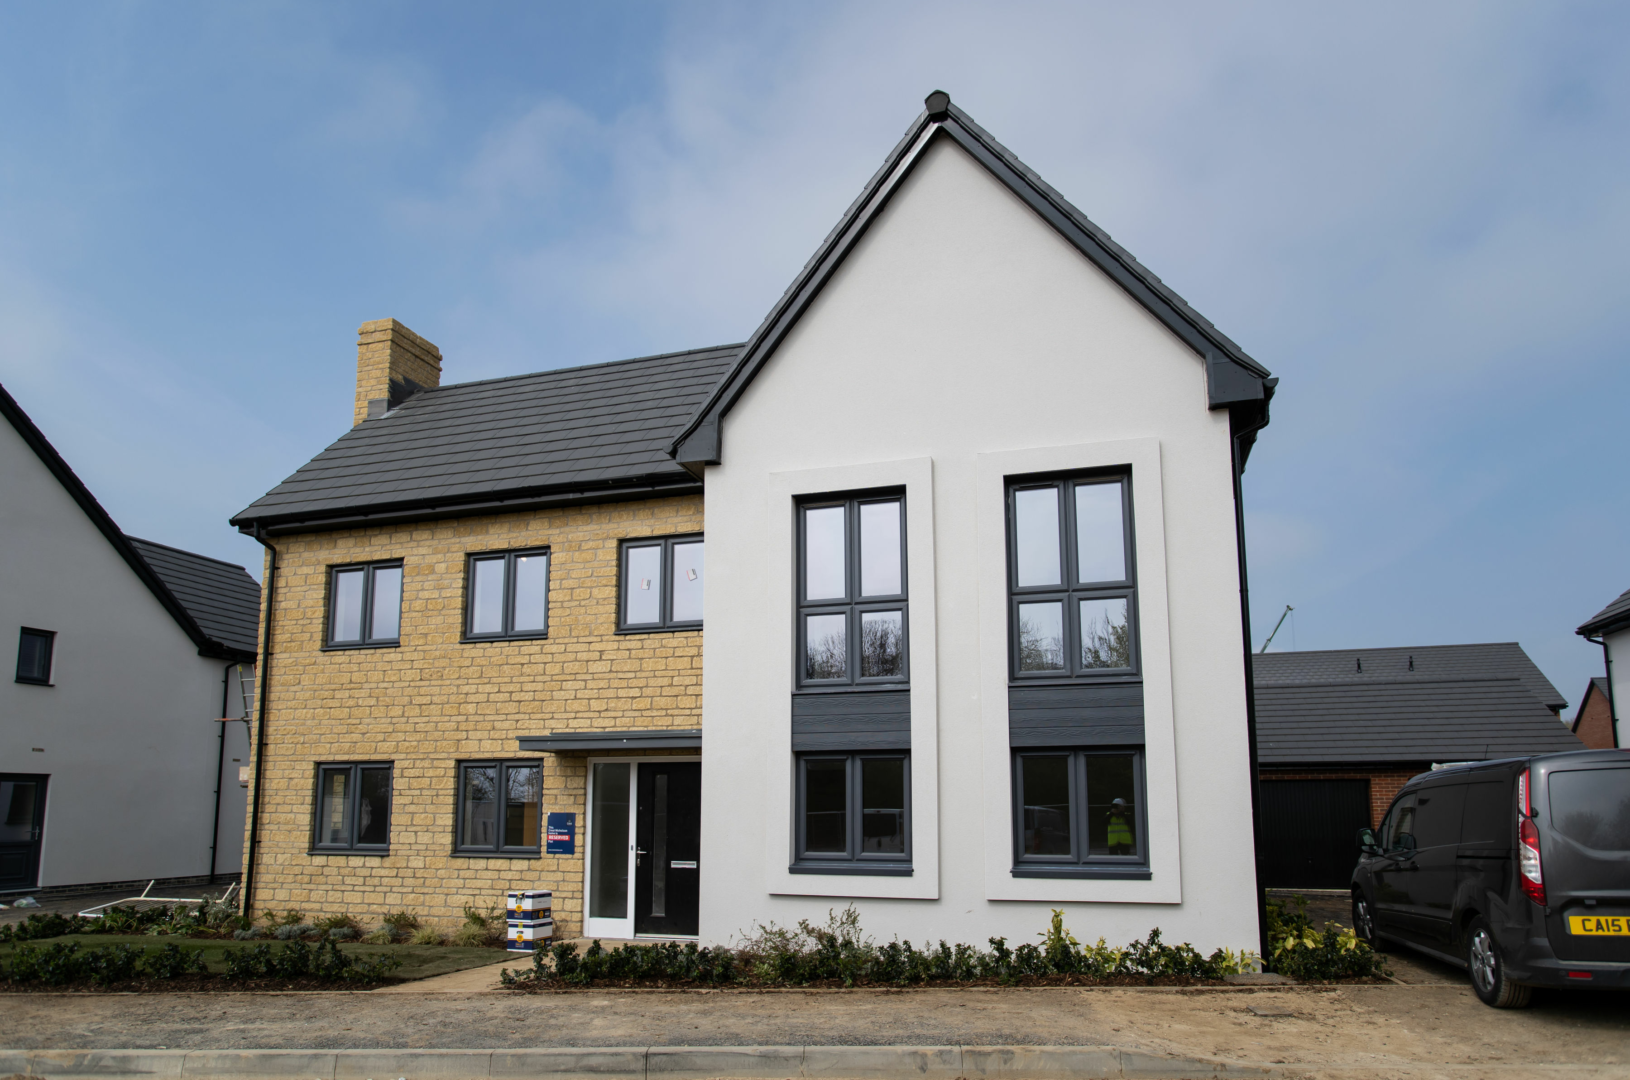 A new residential house completed with Donaldson Timber Systems products